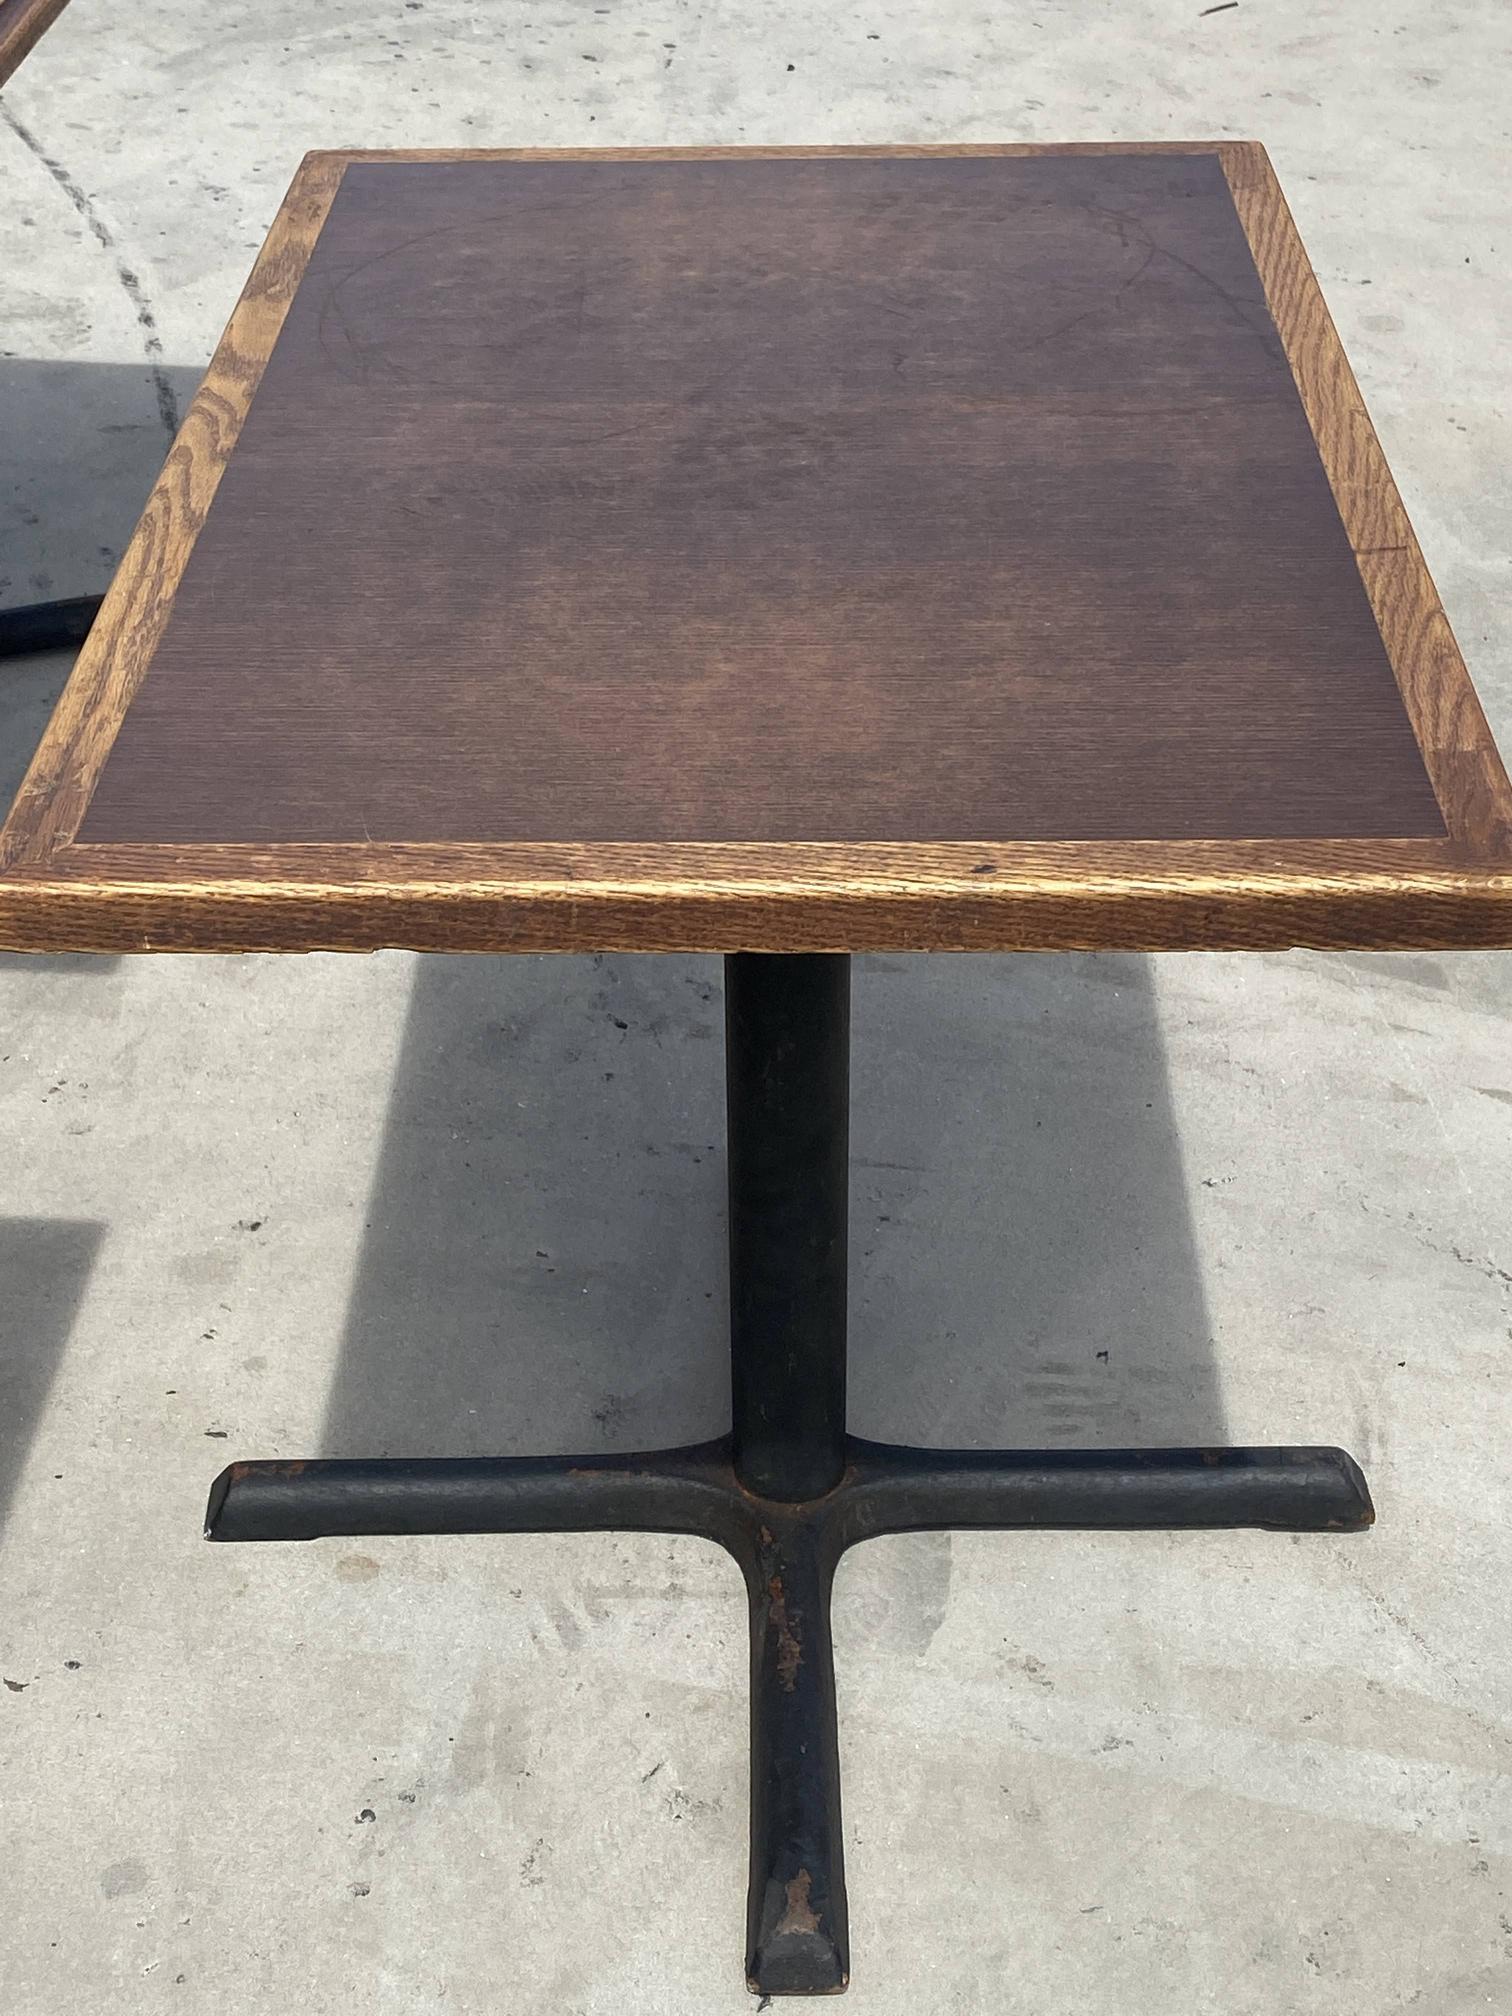 36" by 24" Heavy Wood Top Table W/ Base - Restaurant Seating